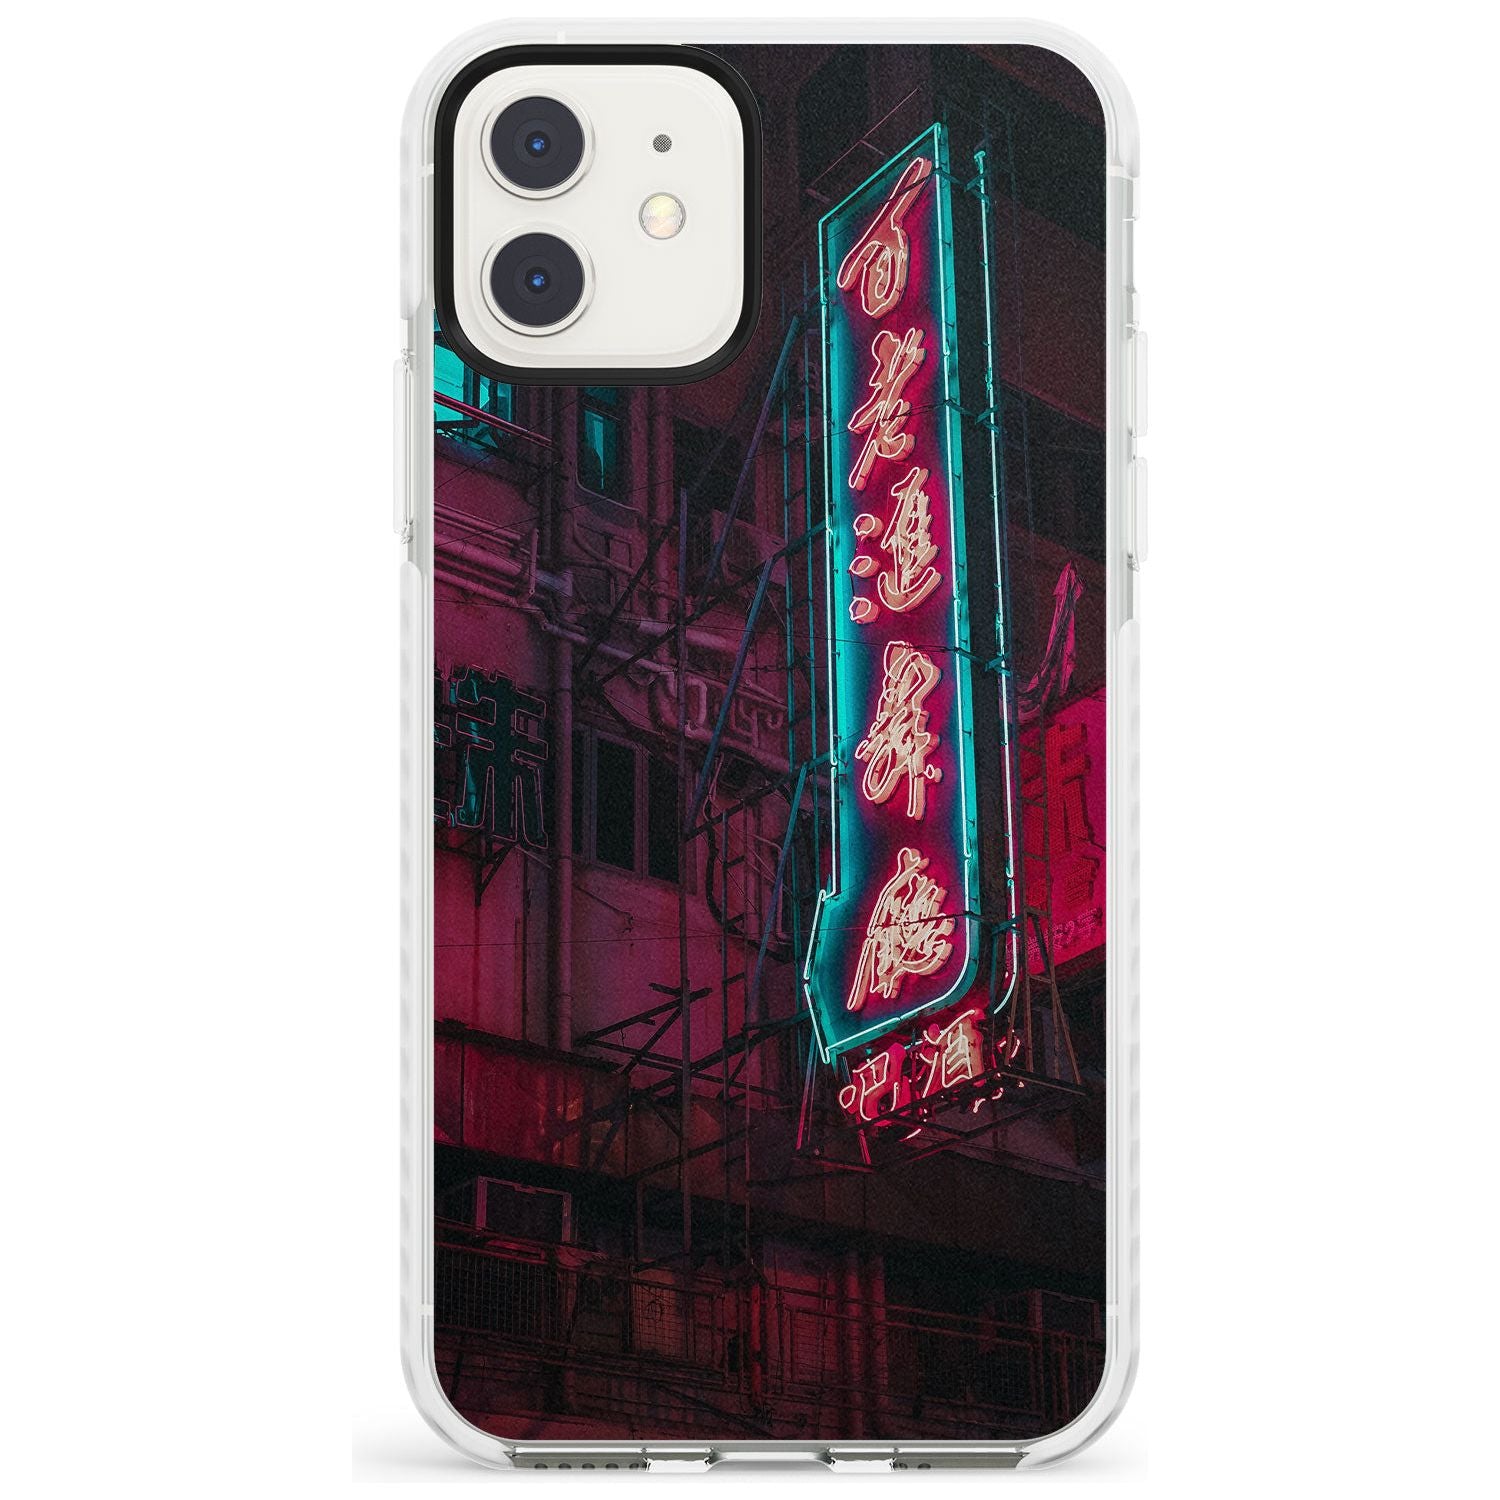 Large Kanji Sign - Neon Cities Photographs Impact Phone Case for iPhone 11